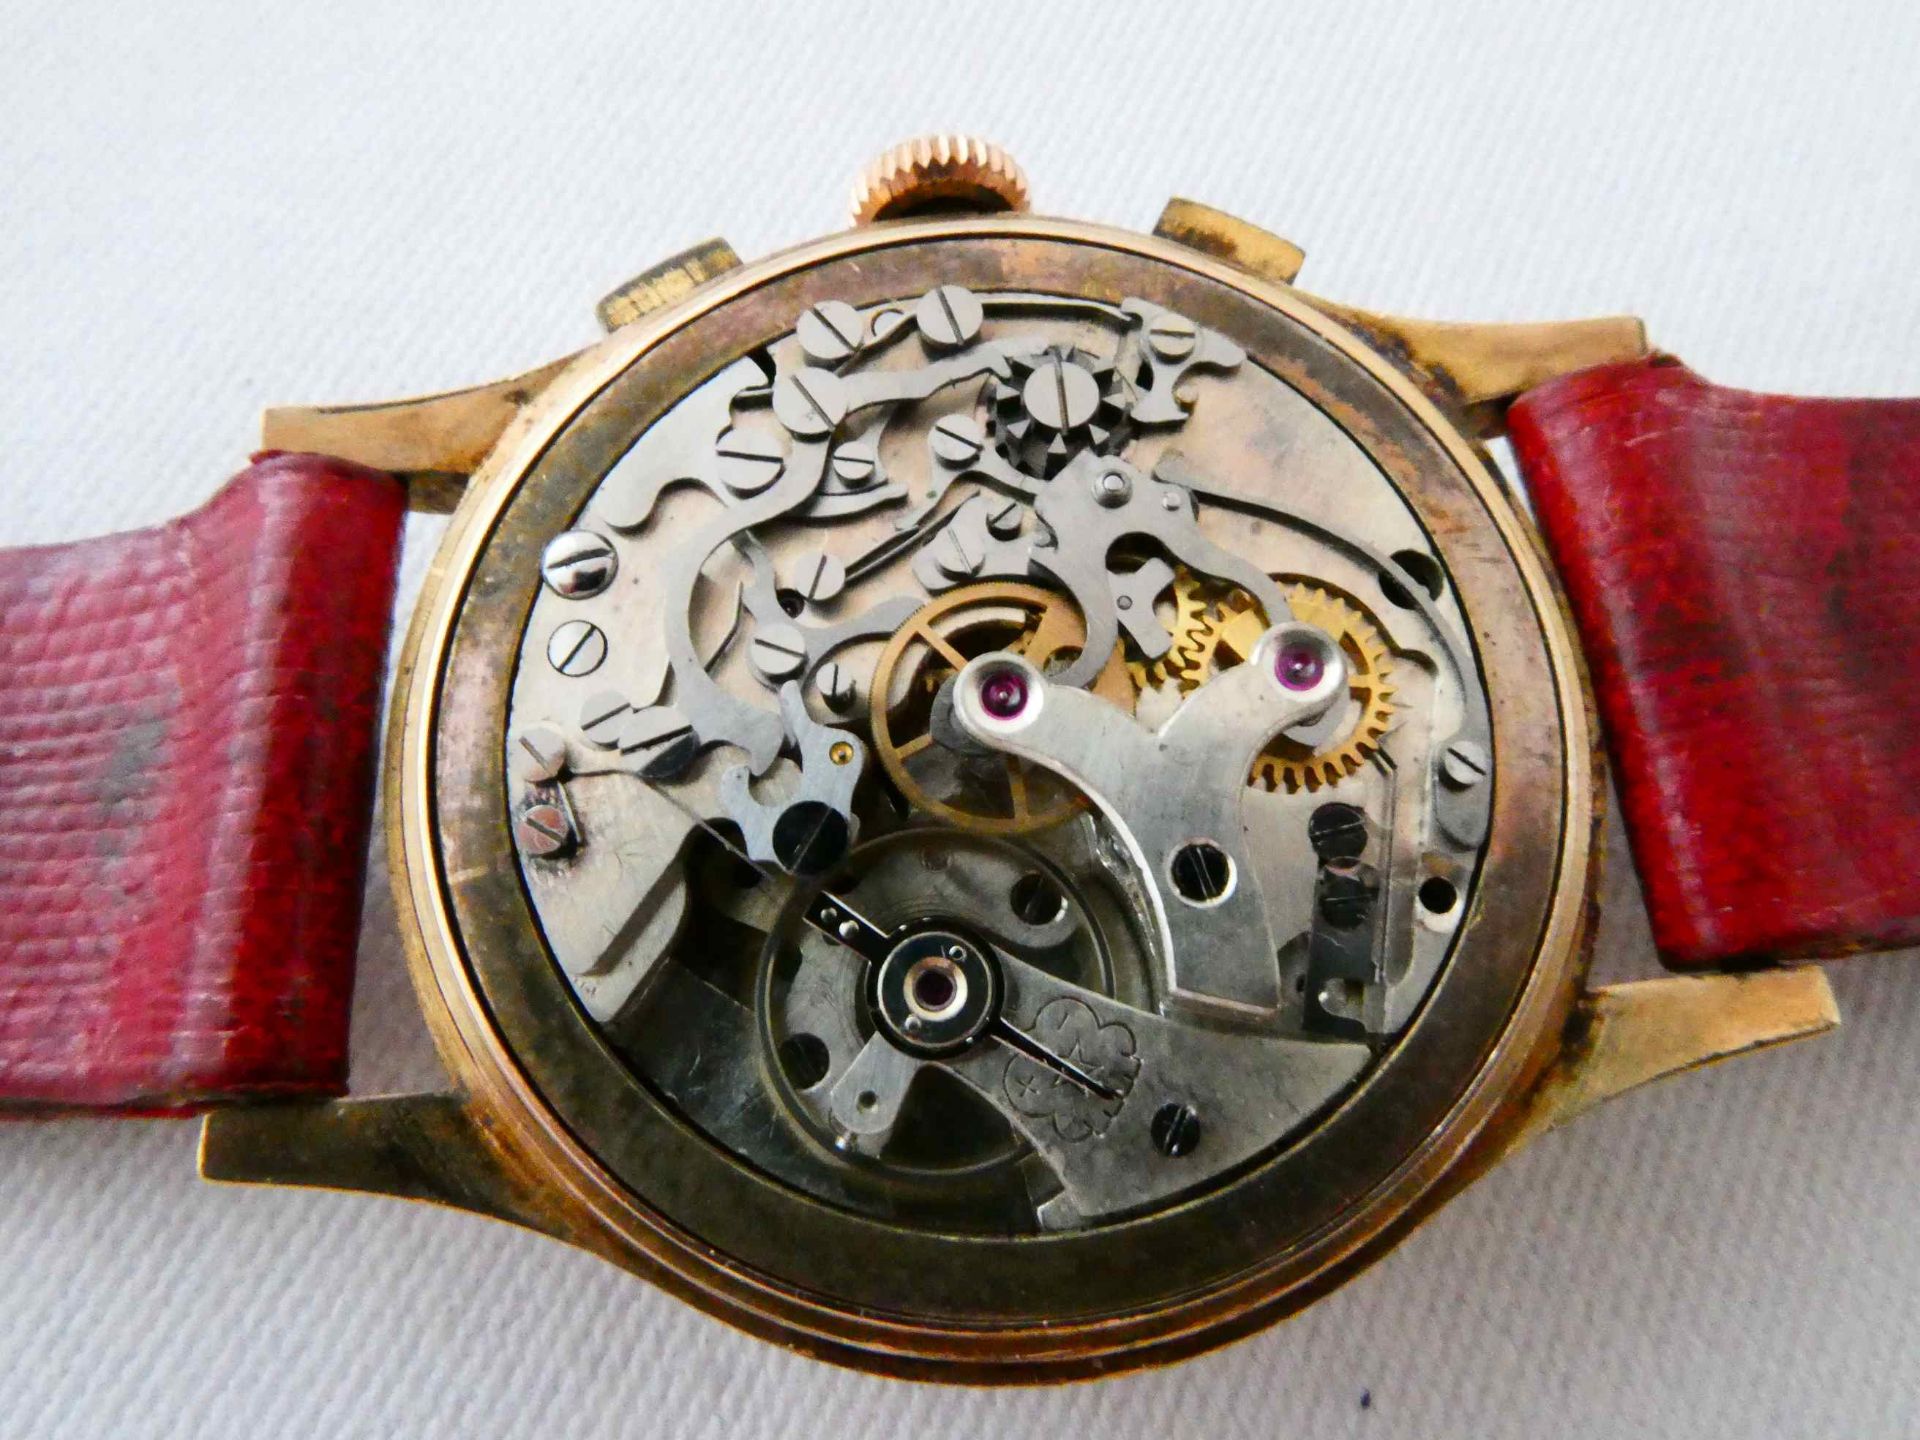 Chronographe Suisse in 18K Gold - Image 5 of 5